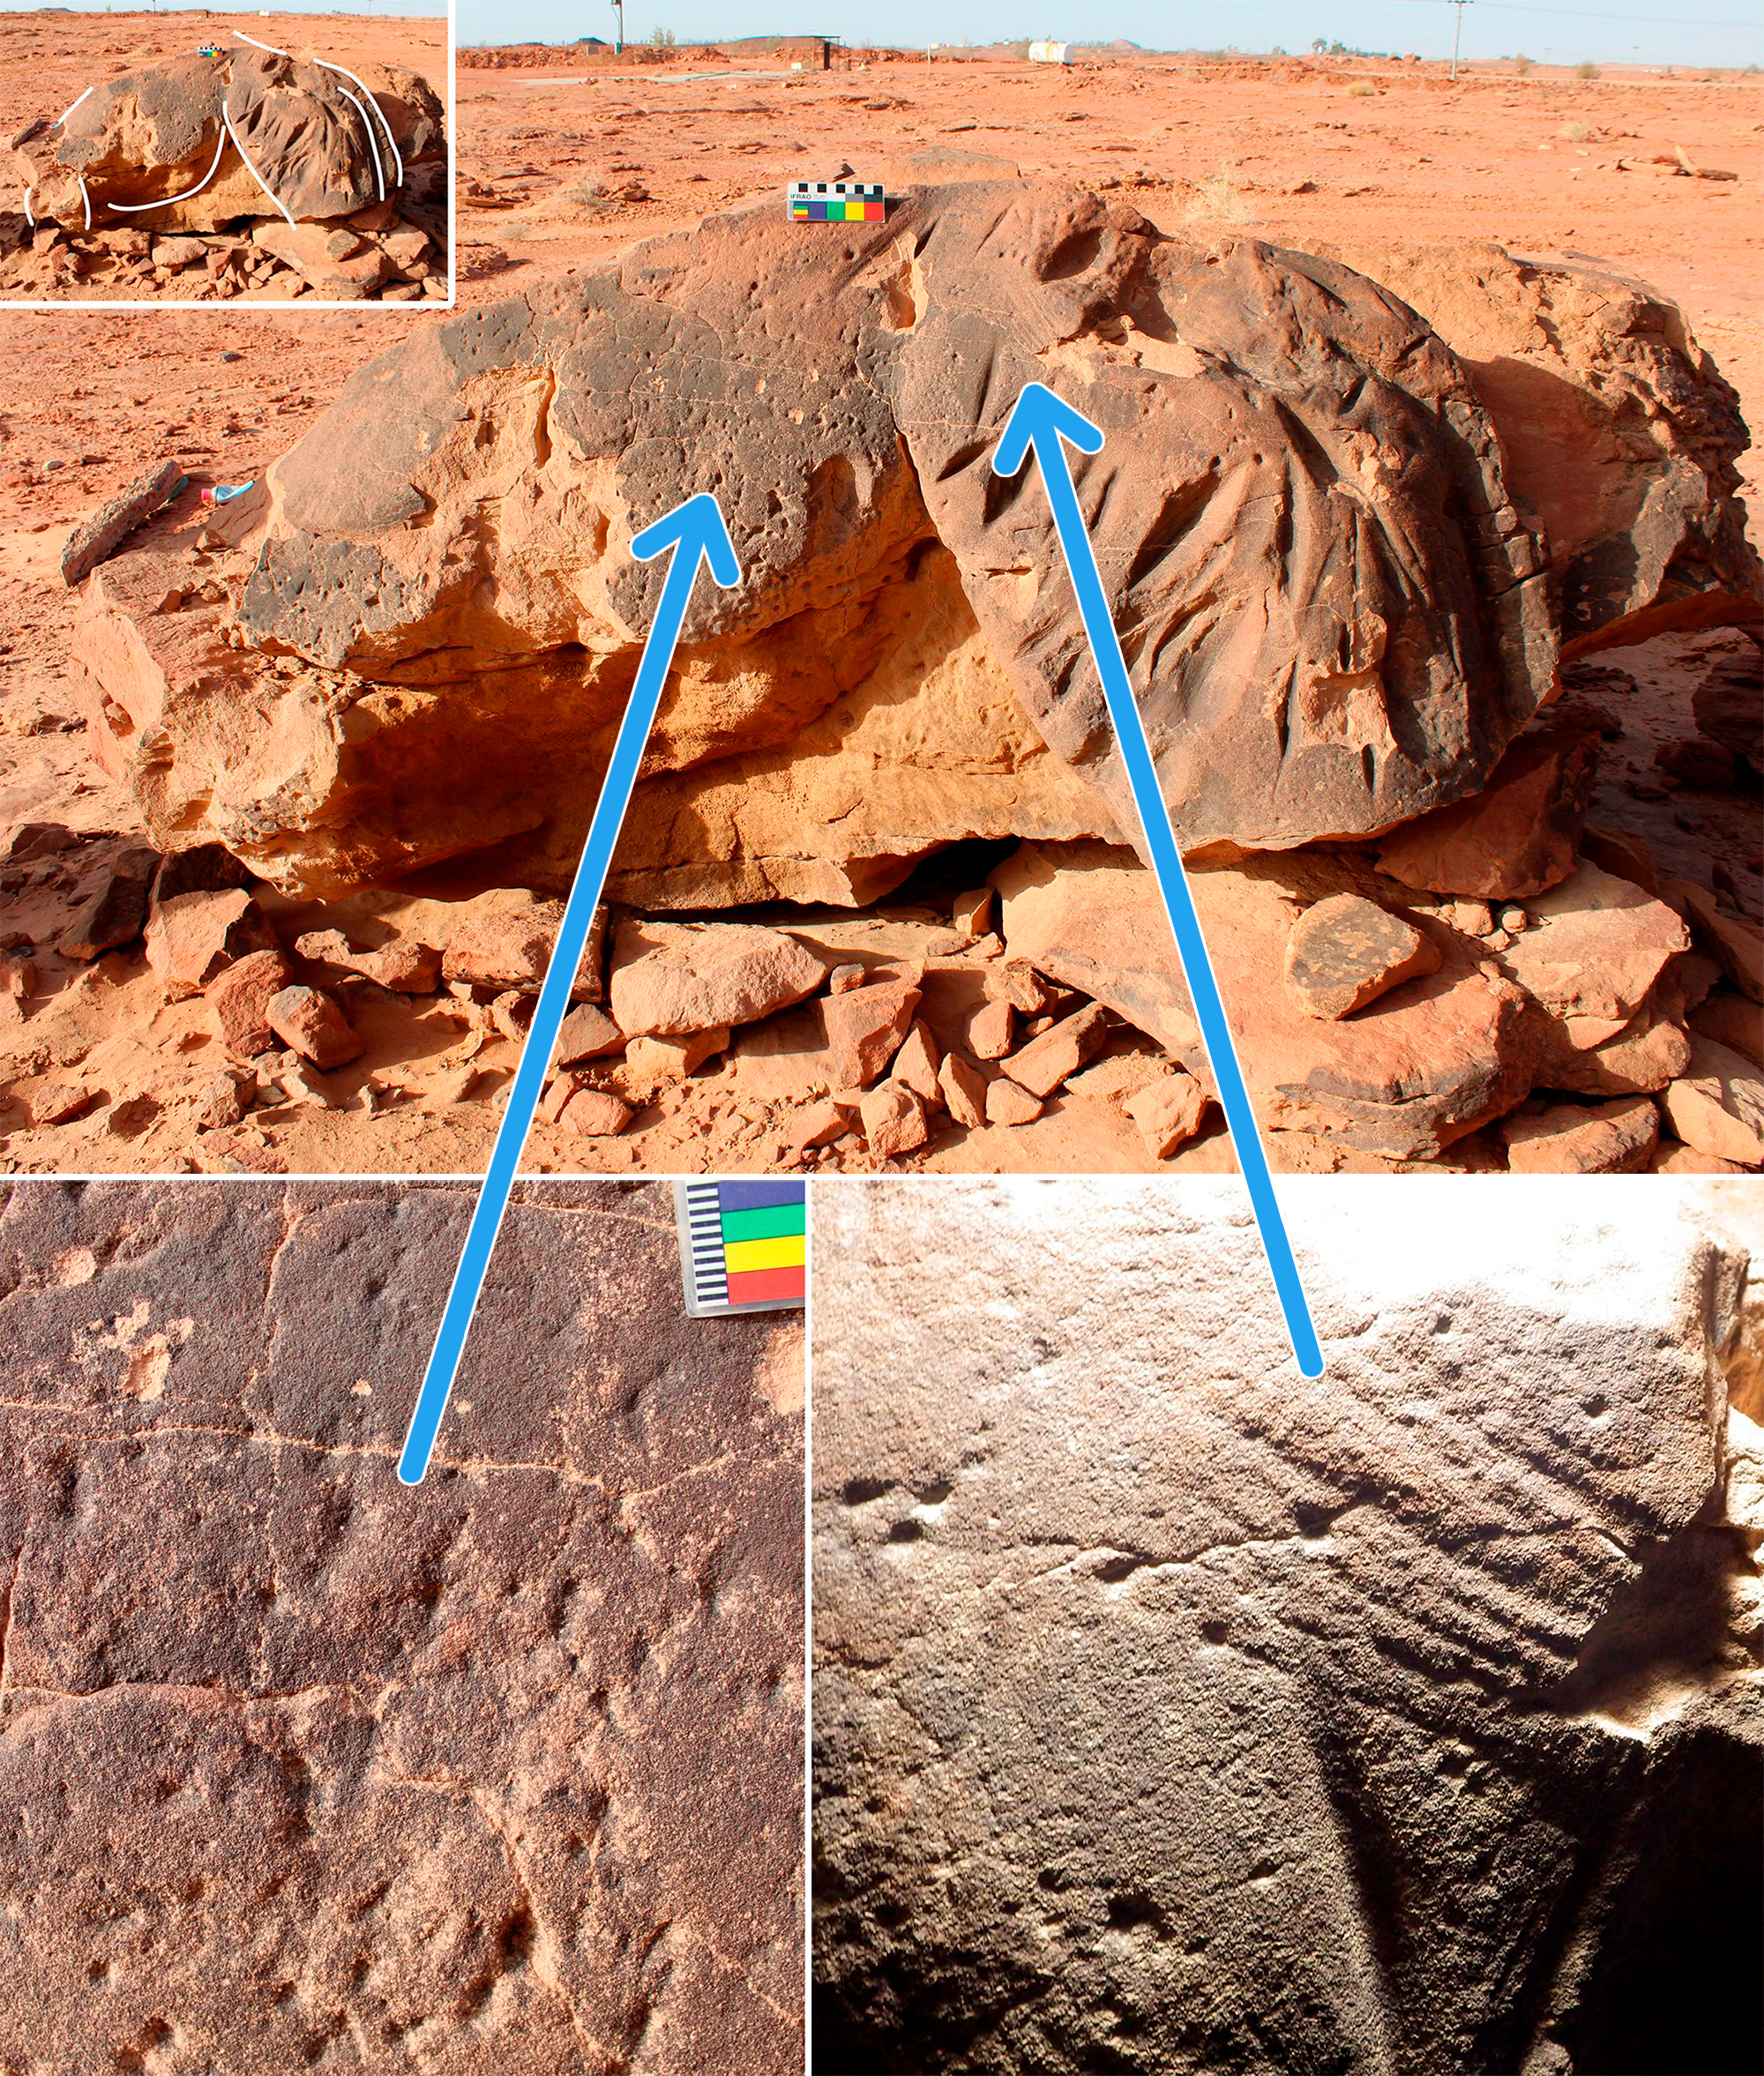 Panel 1 showing the belly, thigh and upper tail of a camel. Tool marks can be seen on the lower abdomen and the upper thigh, as well as a series of deep grooves. Detail photographs are shown on the lower left and lower right